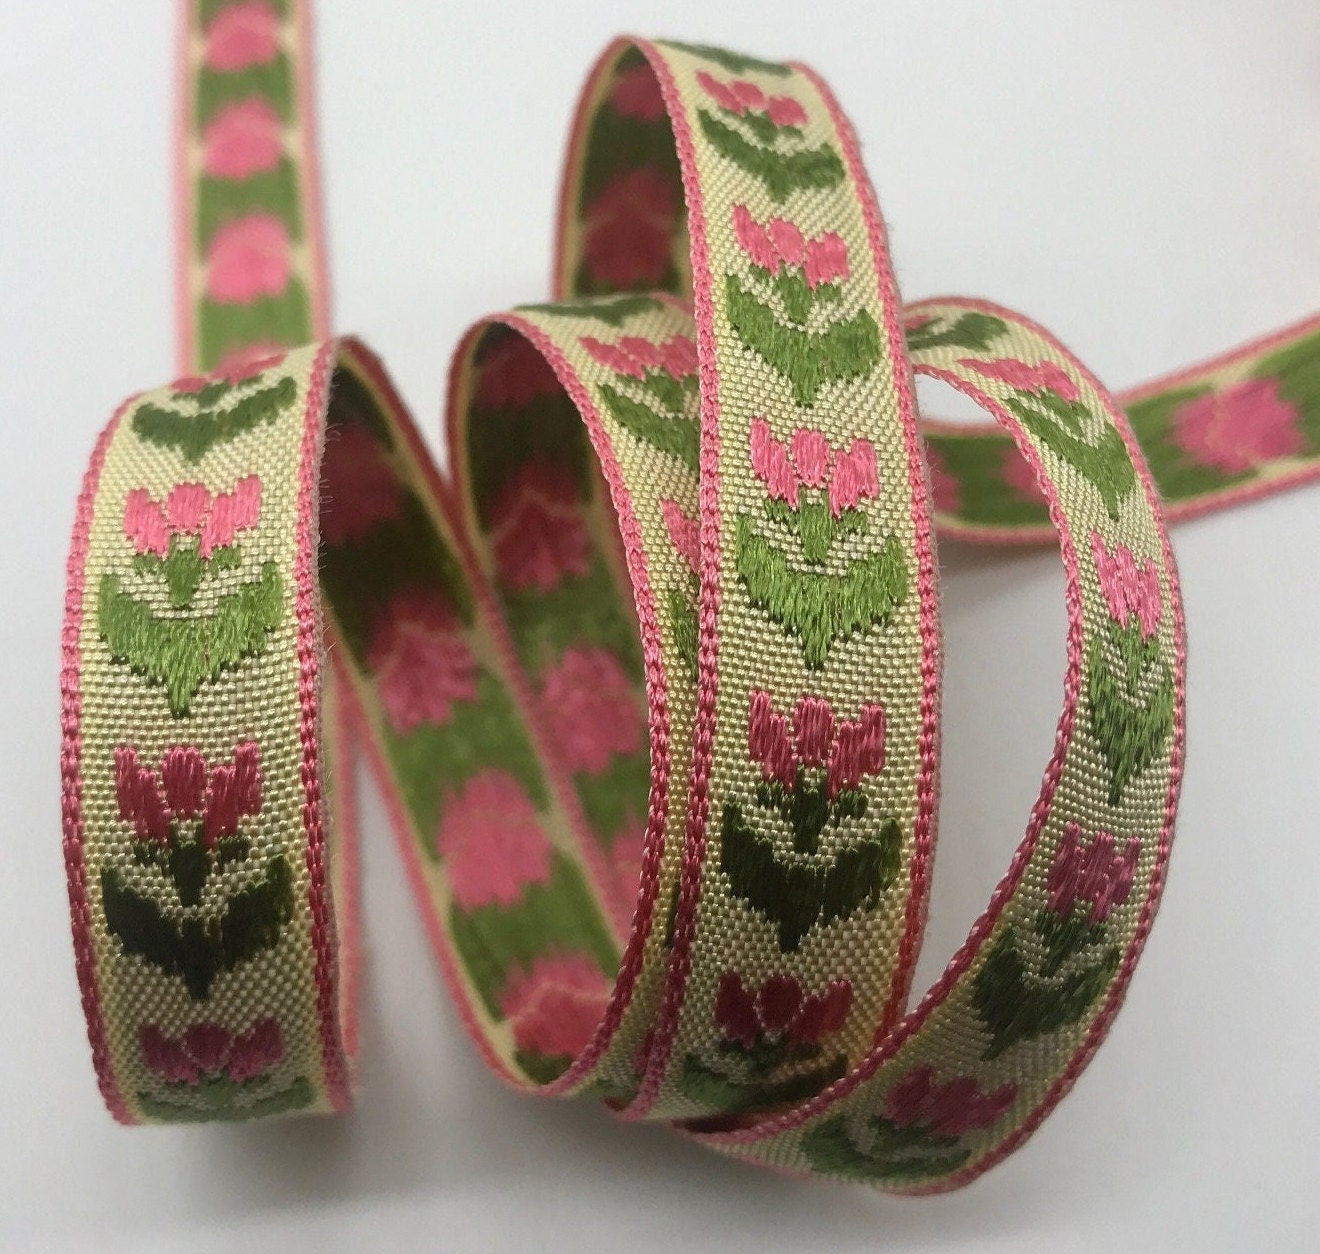 M&J Trimming Swiss Velvet Ribbon - 2 Wide Plush Single Face Woven Velvet  Trim for Sewing Embellishment, Crafts, DIY Decorations, & Holiday Projects  